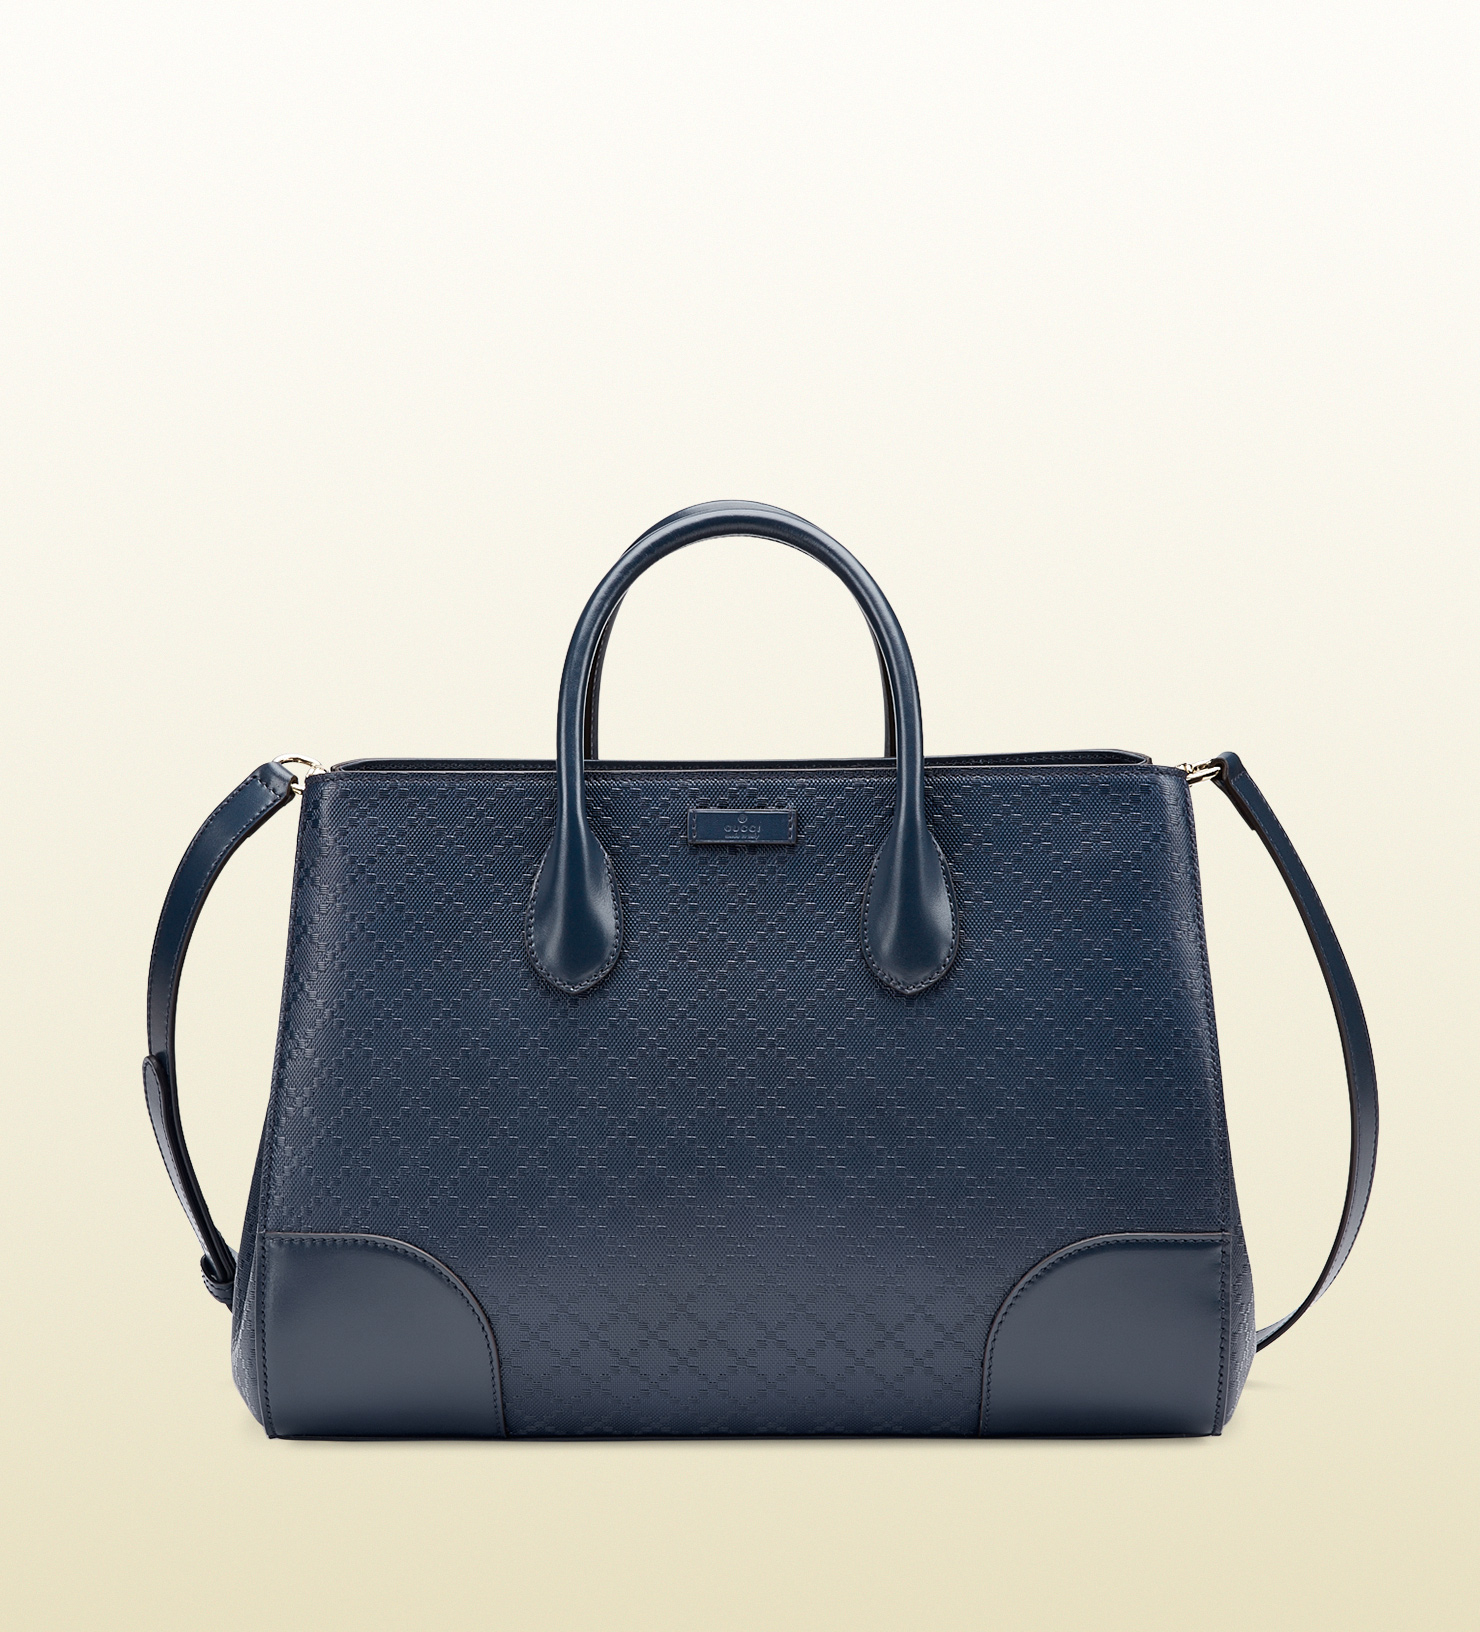 Gucci Bright Diamante Leather Top Handle Bag in Blue - Lyst